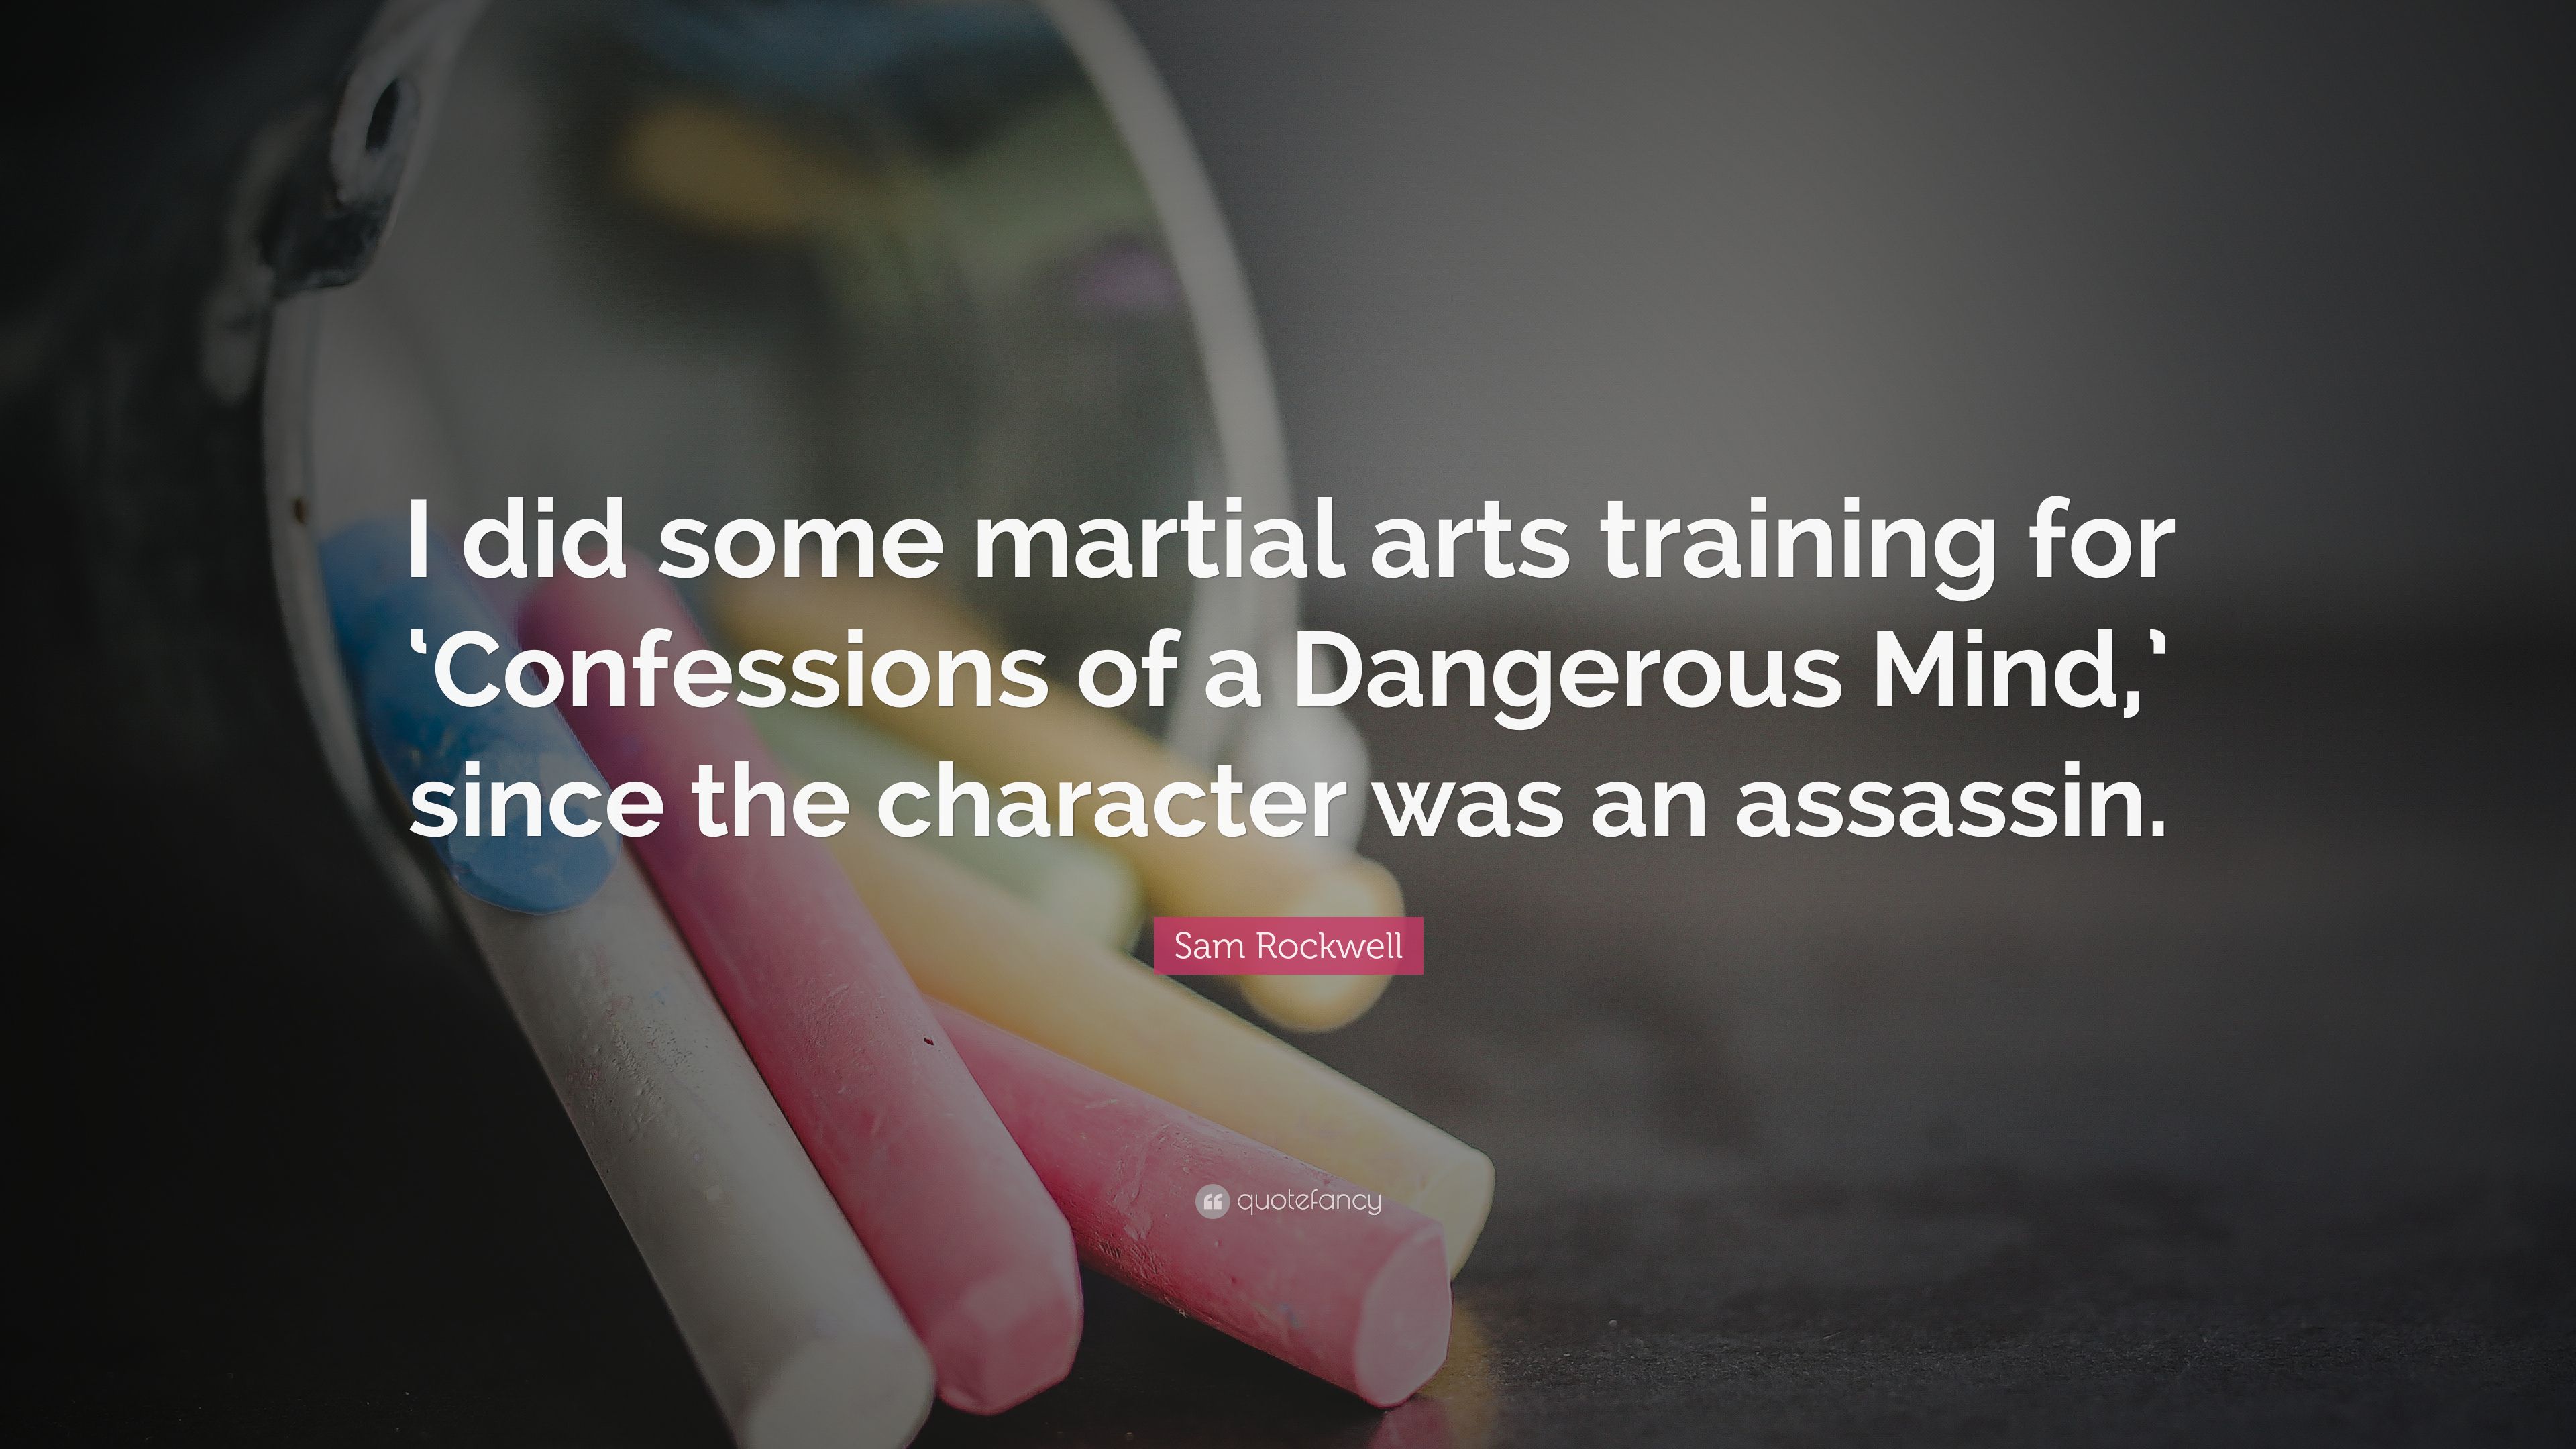 Sam Rockwell Quote: “I did some martial arts training